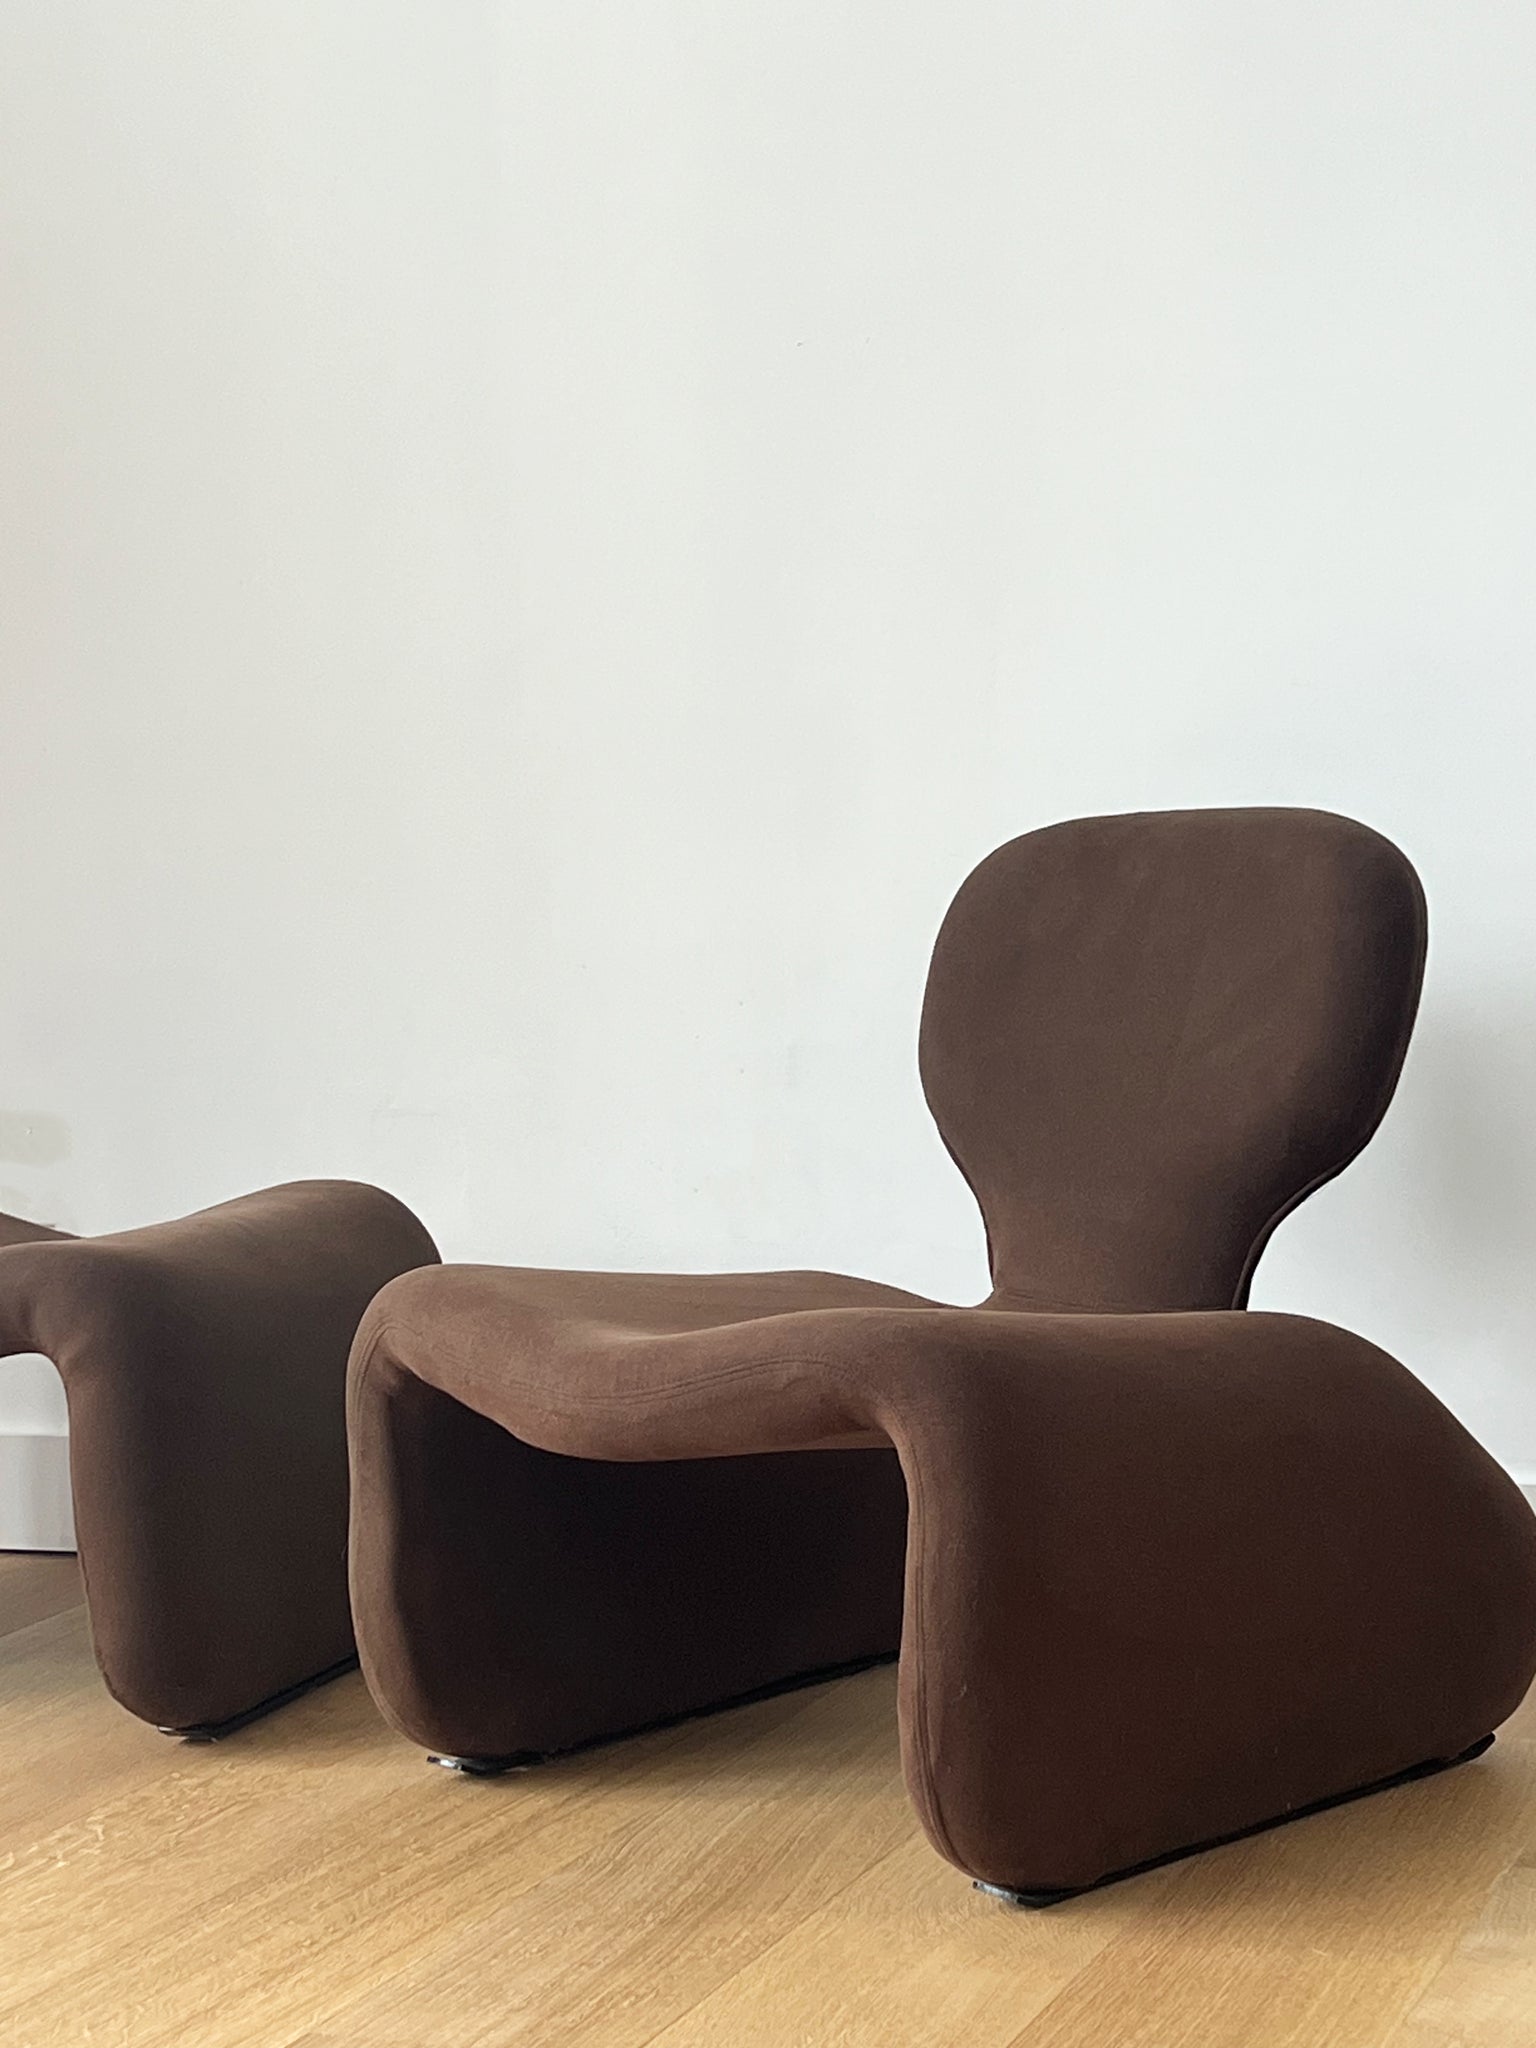 1960s Chocolate Brown Olivier Mourgue For Airborne Djinn Chair + Ottoman